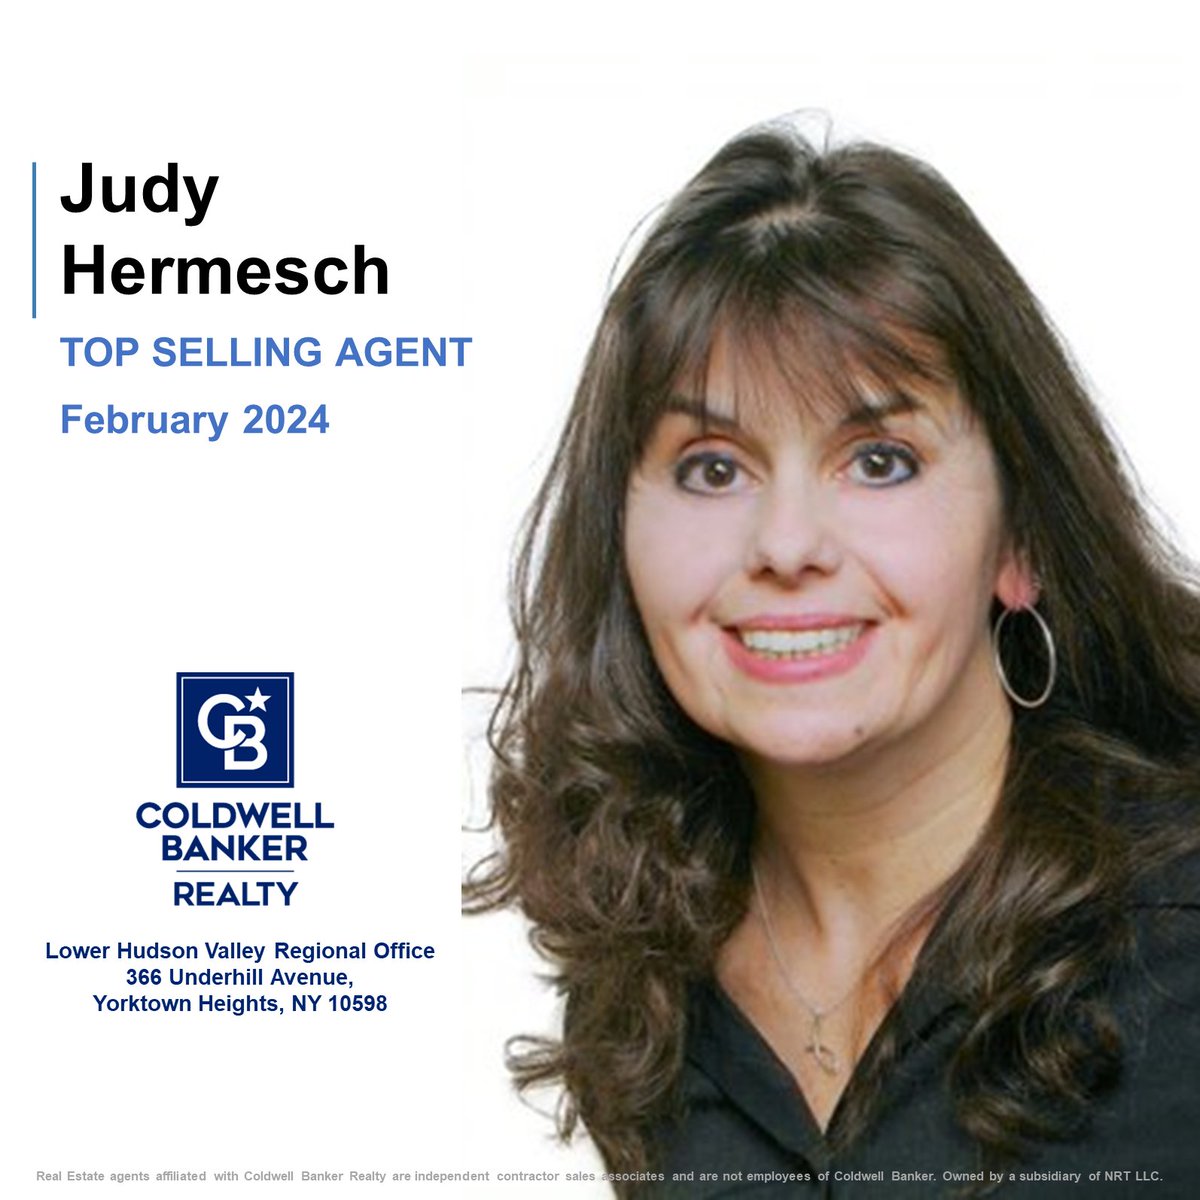 Congratulations to Judy Hermesch on being February’s Top Selling Agent.
Your dedication and hard work is greatly appreciated!
#congratulations #cbr #ctwc #realestate #lhvro #cbproud #cbtheplacetobe #bestagent #agentofcoldwellbanker #judyhermesch